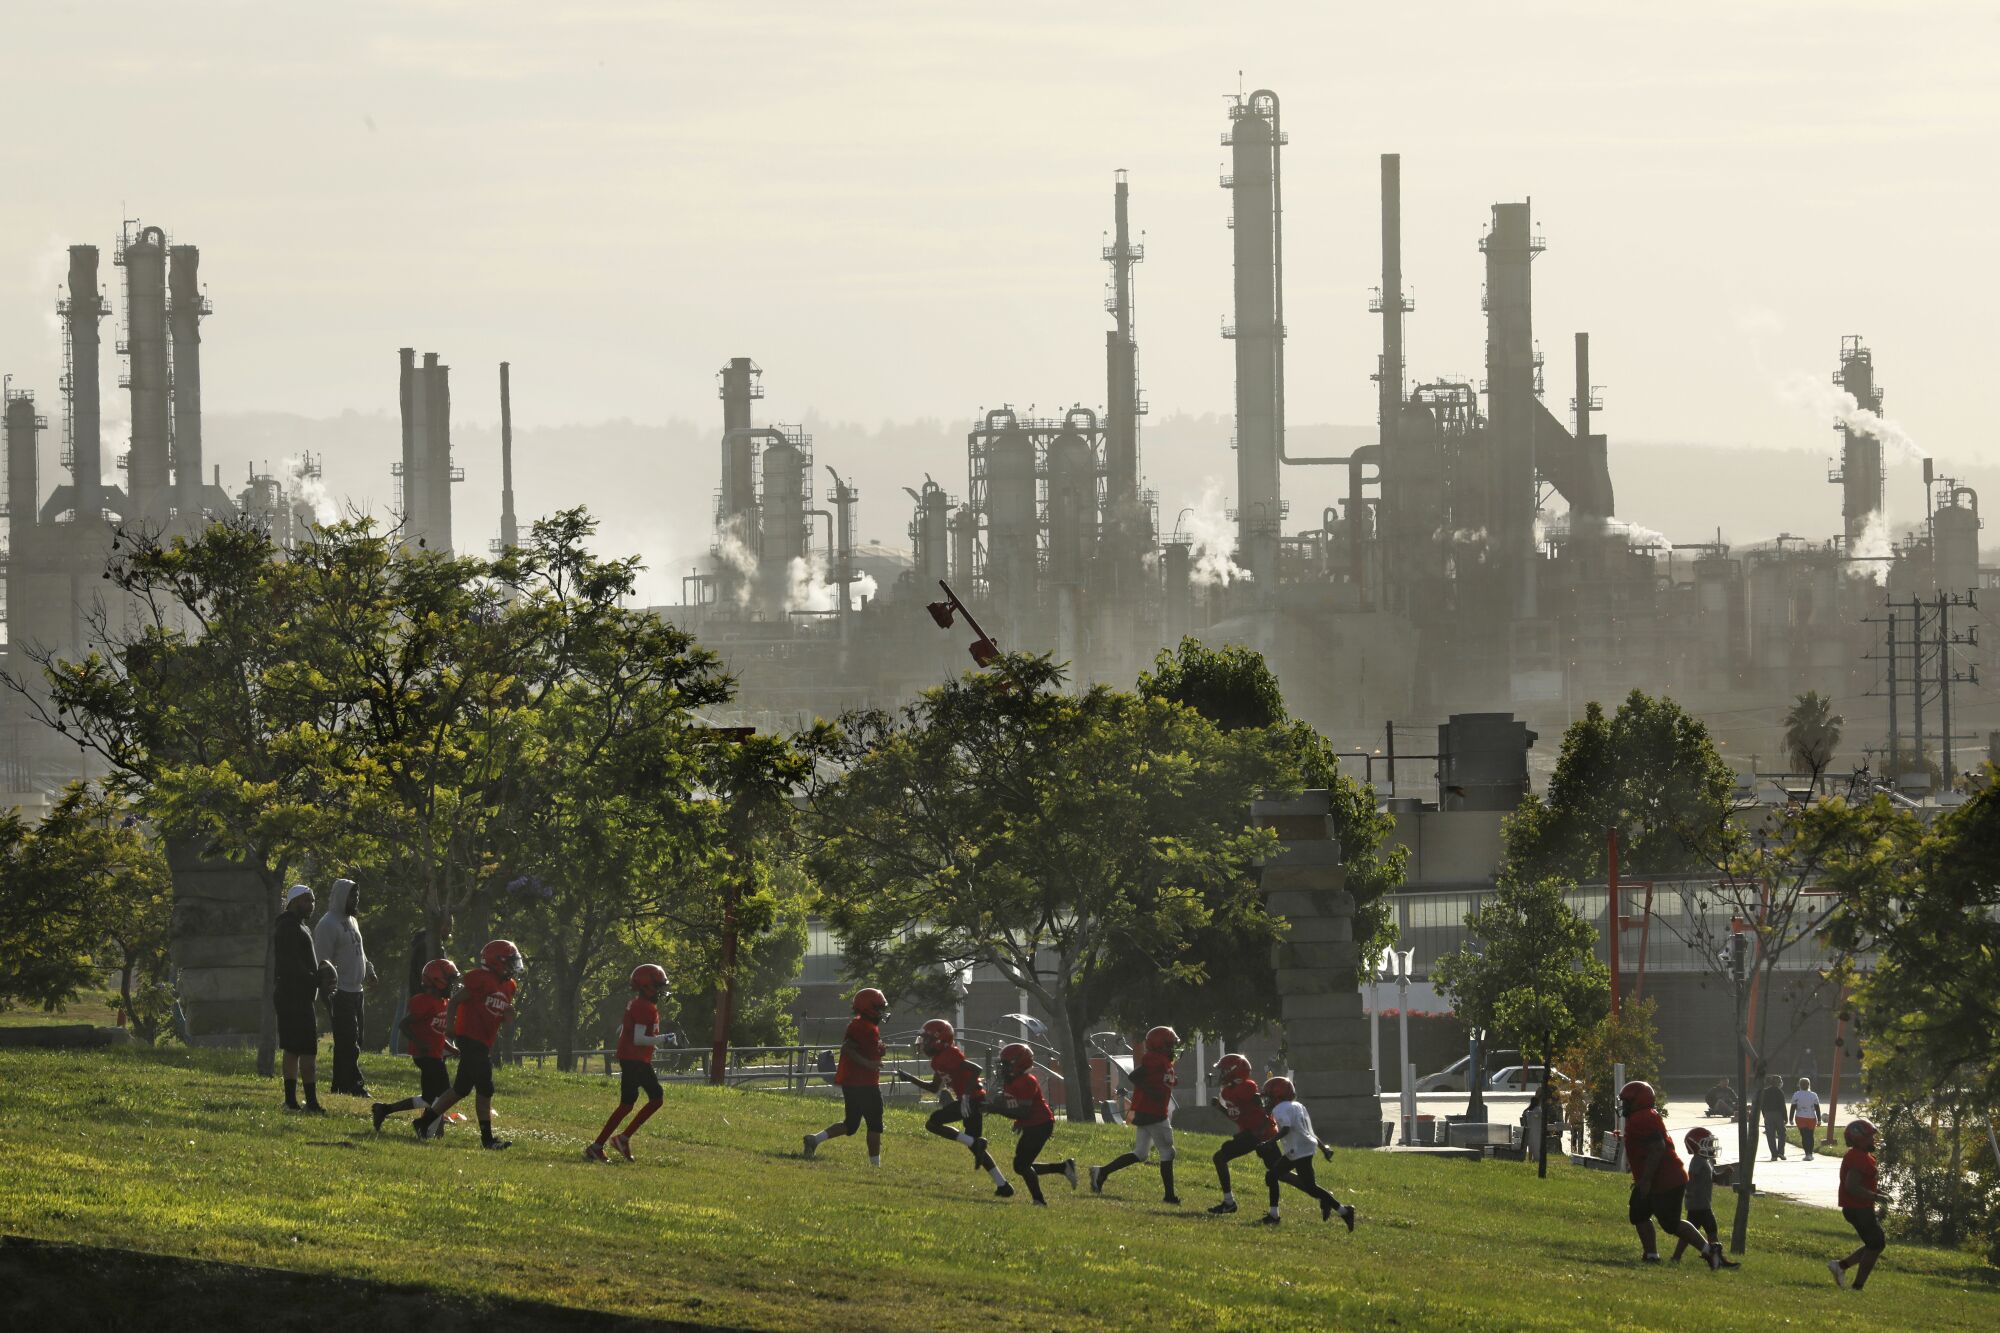 Children in football helmets run in a park with a refinery in the background